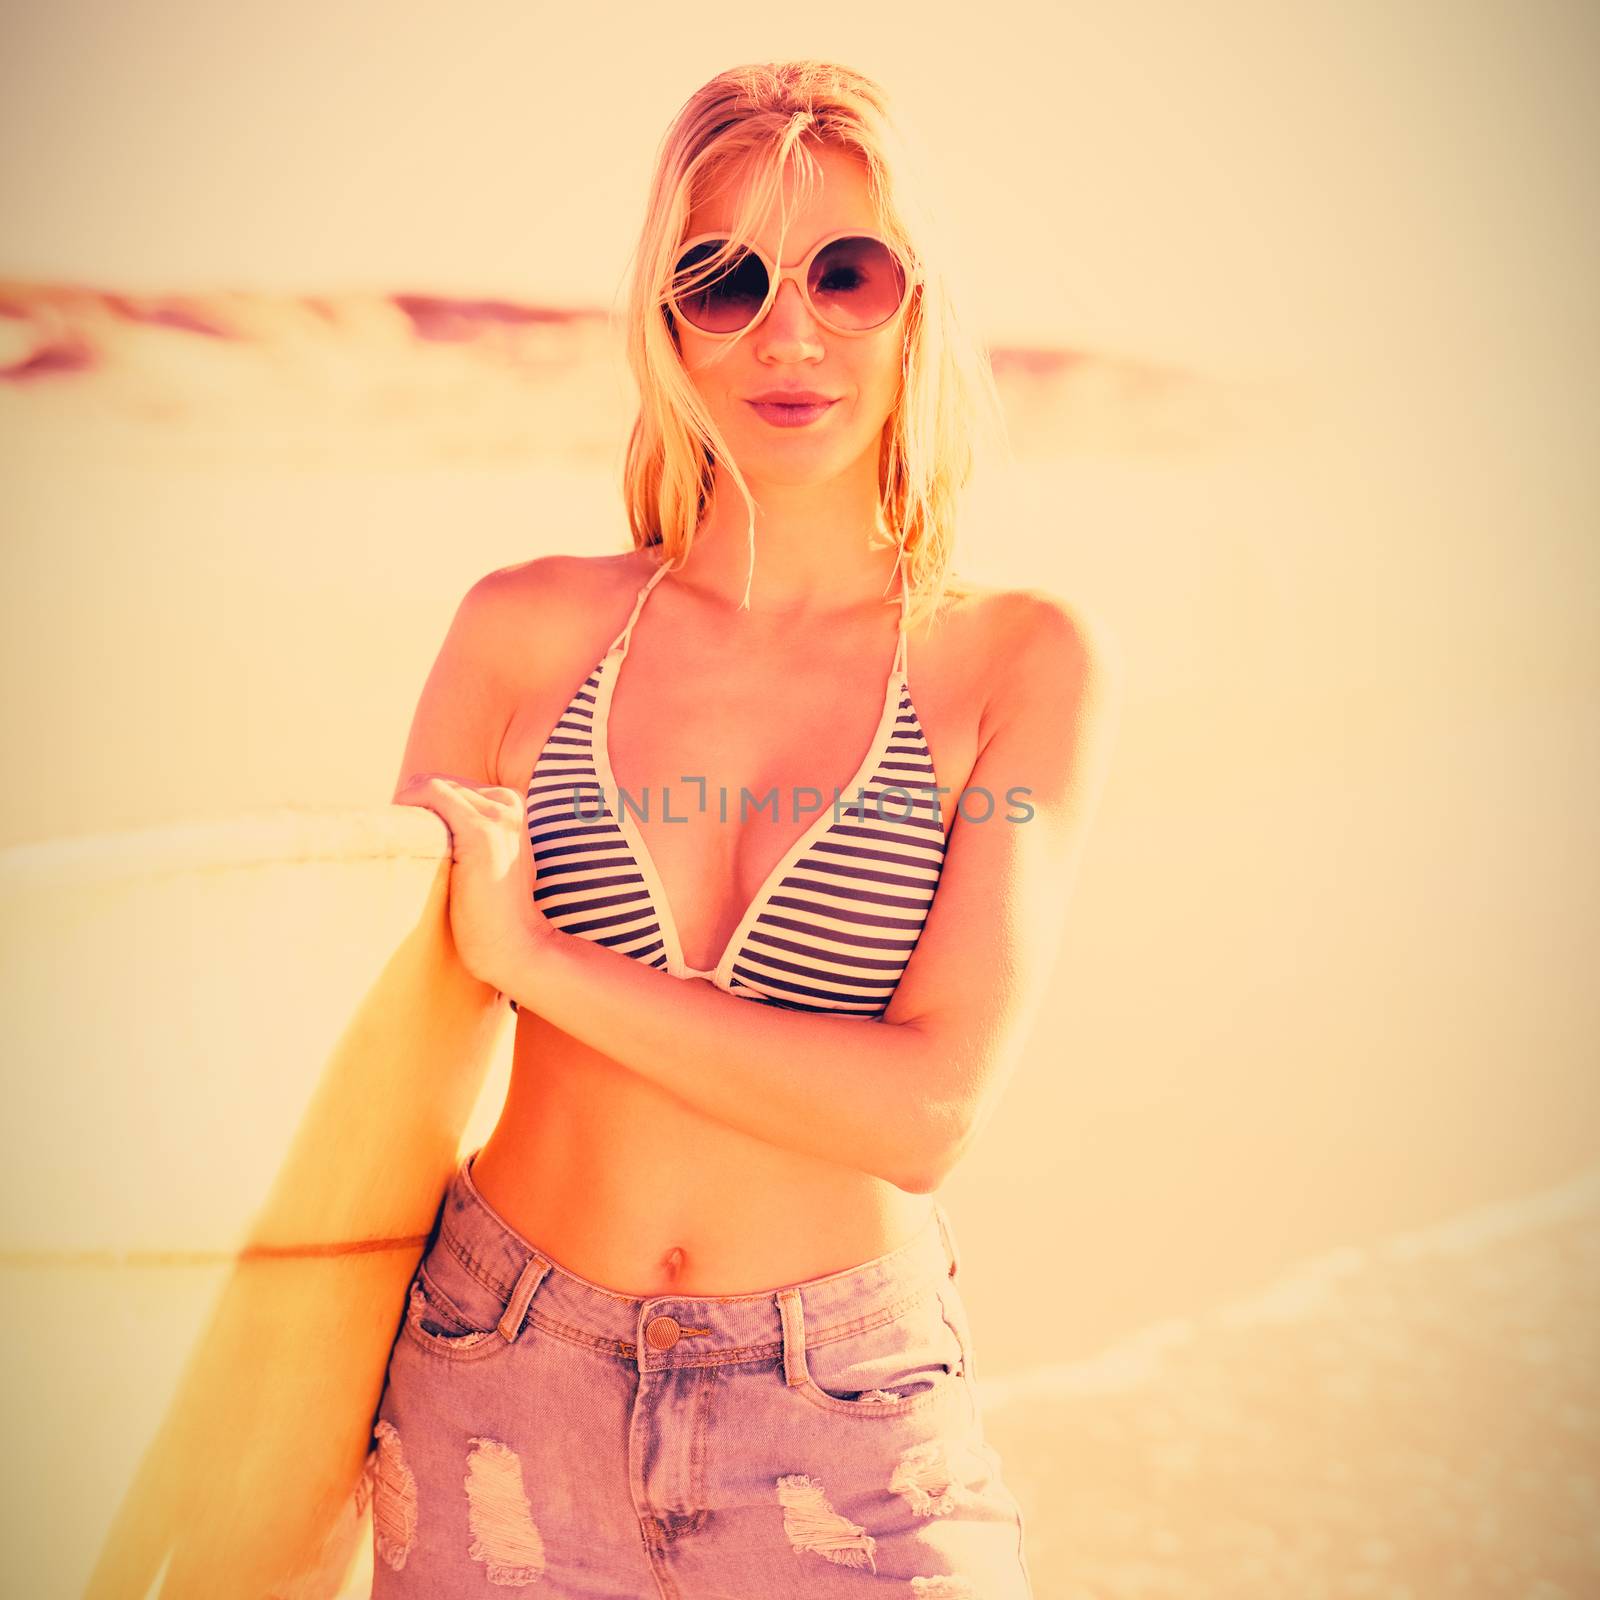 Portrait of young woman holding surfboard at beach during sunny day